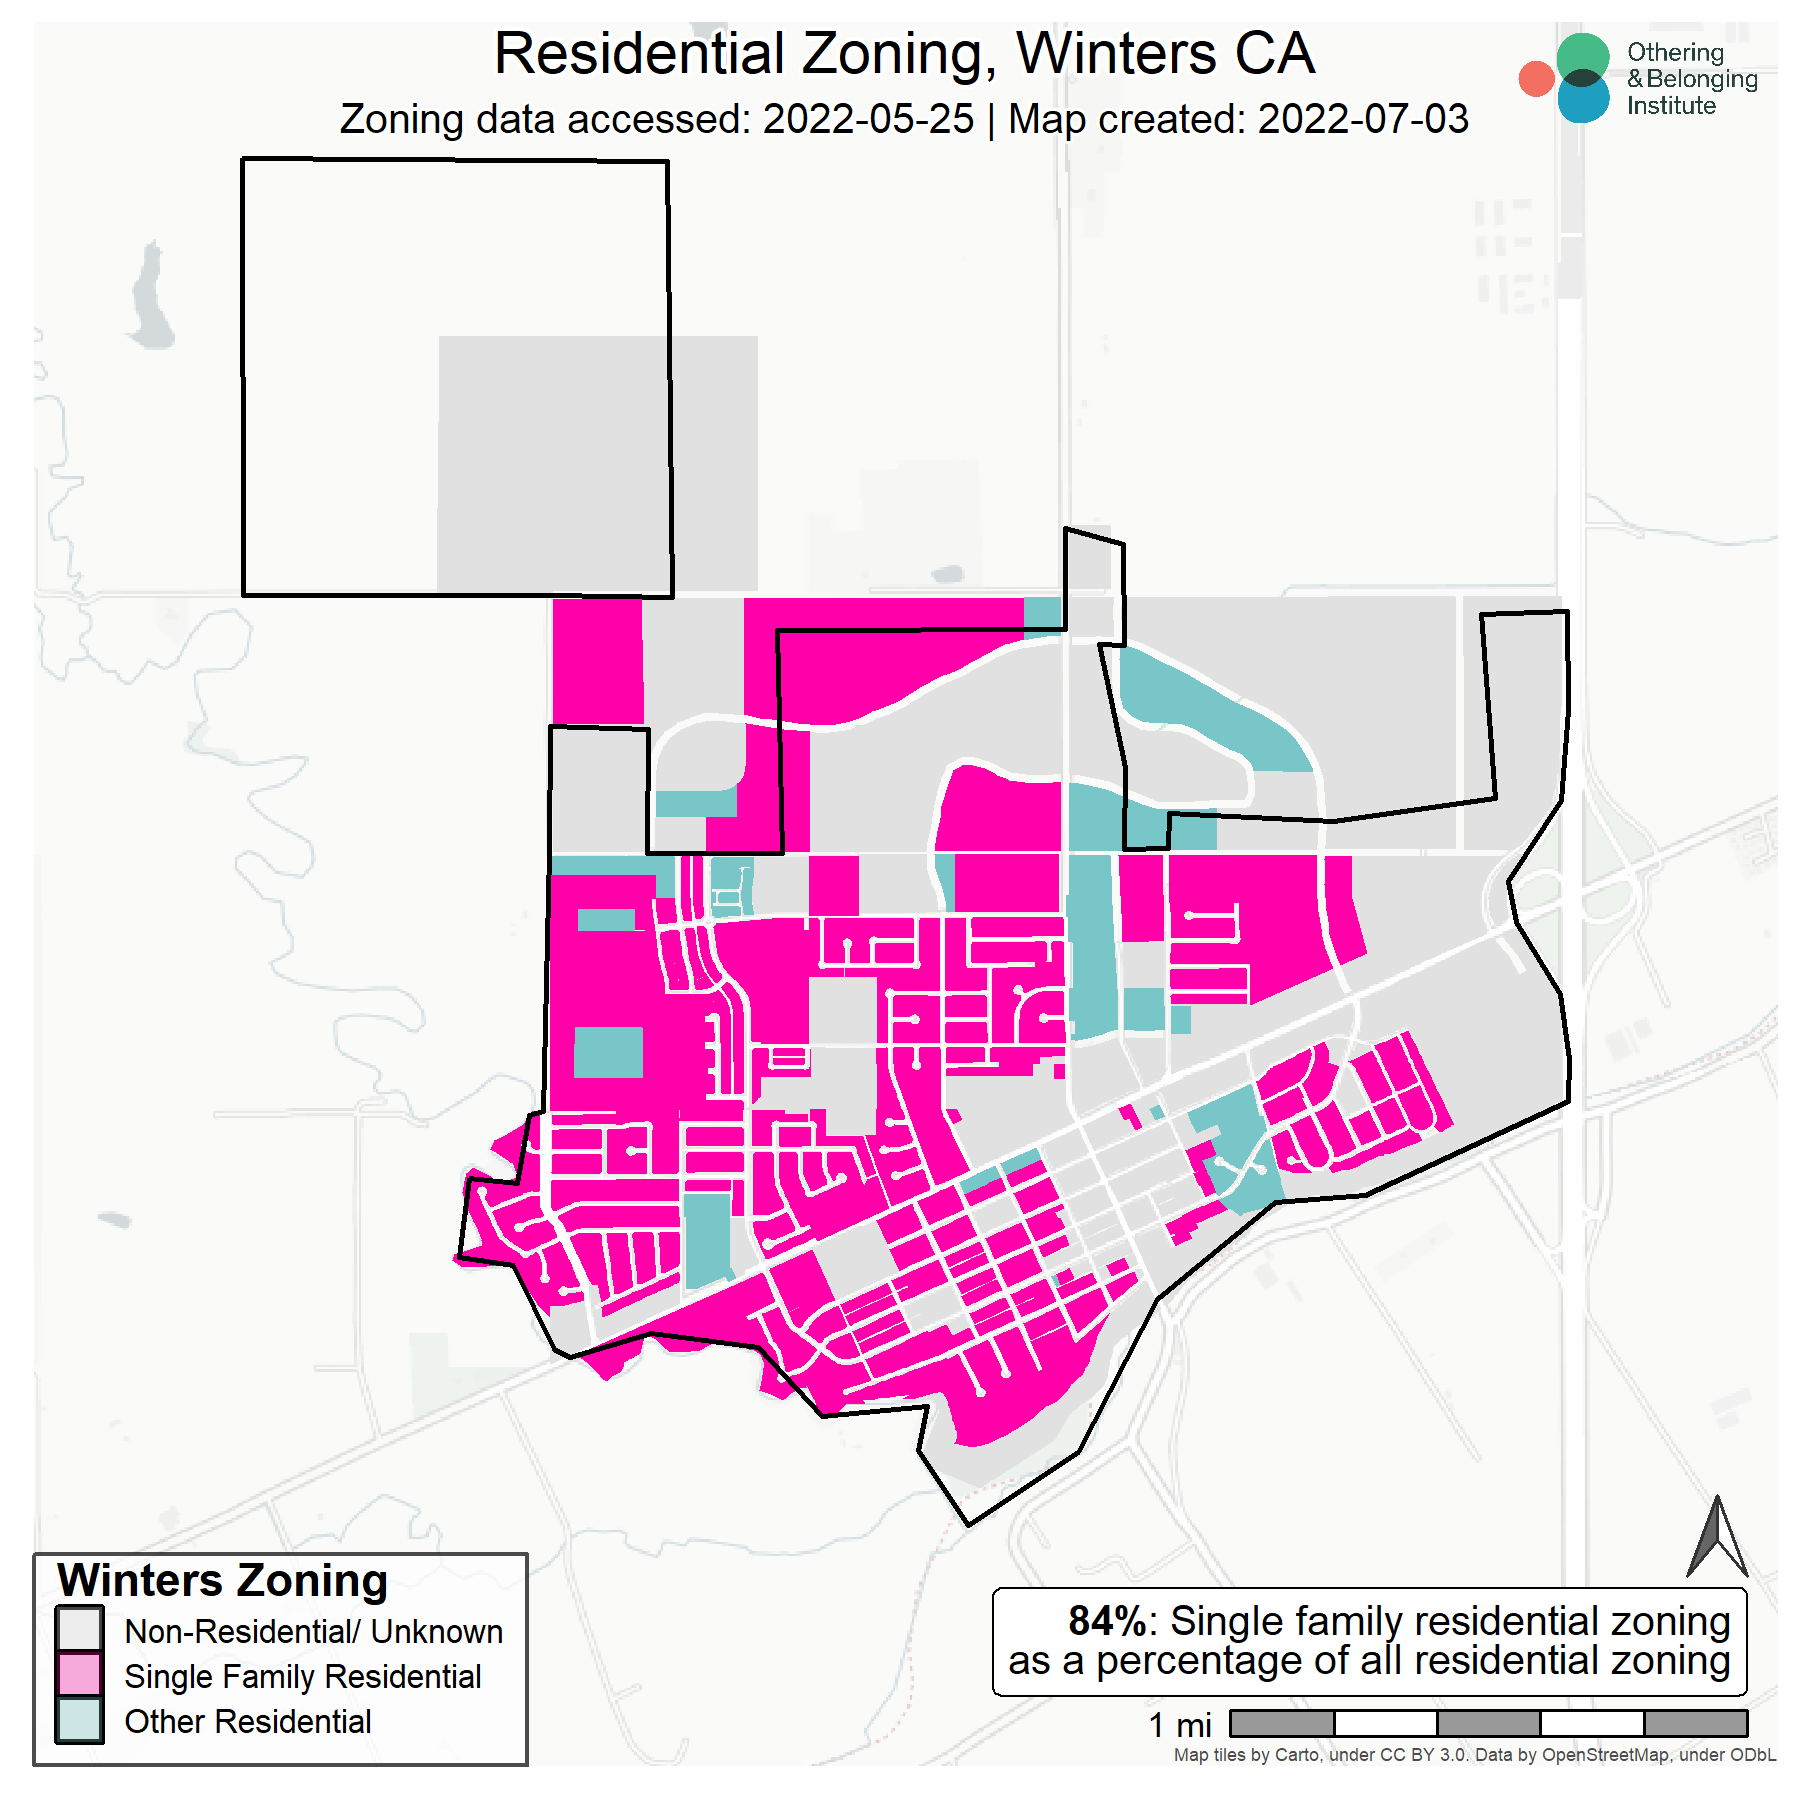 Zoning map of Winters